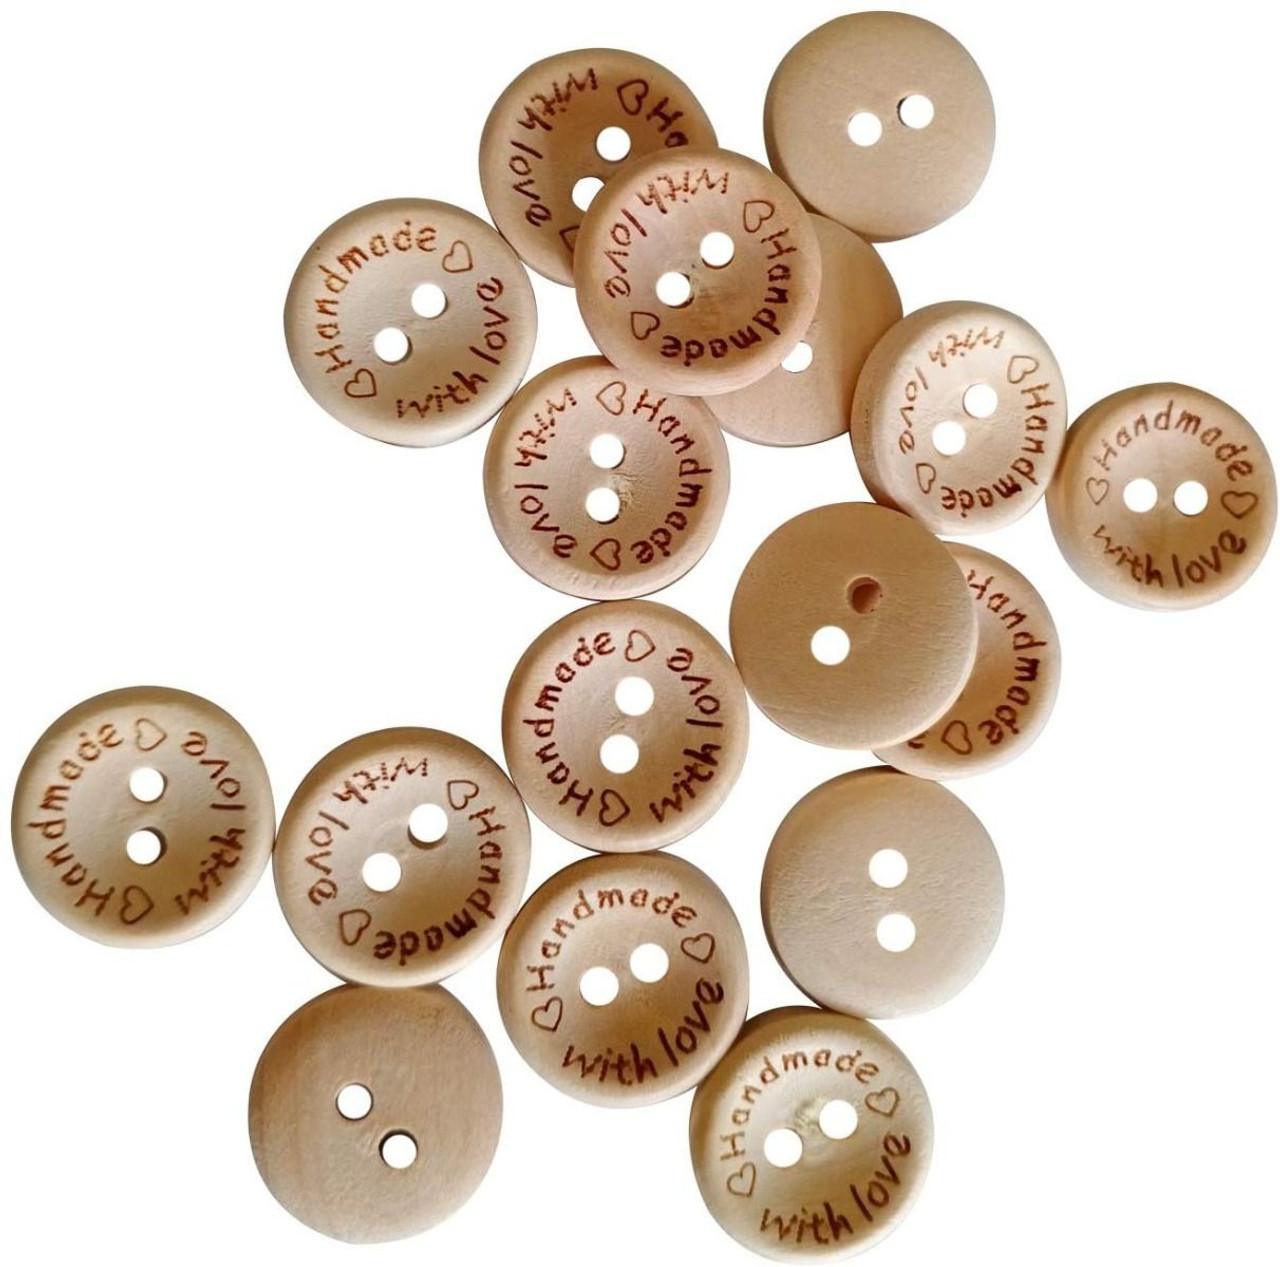 100pcs 2-holes Handmade With Love Round Wooden Buttons Button